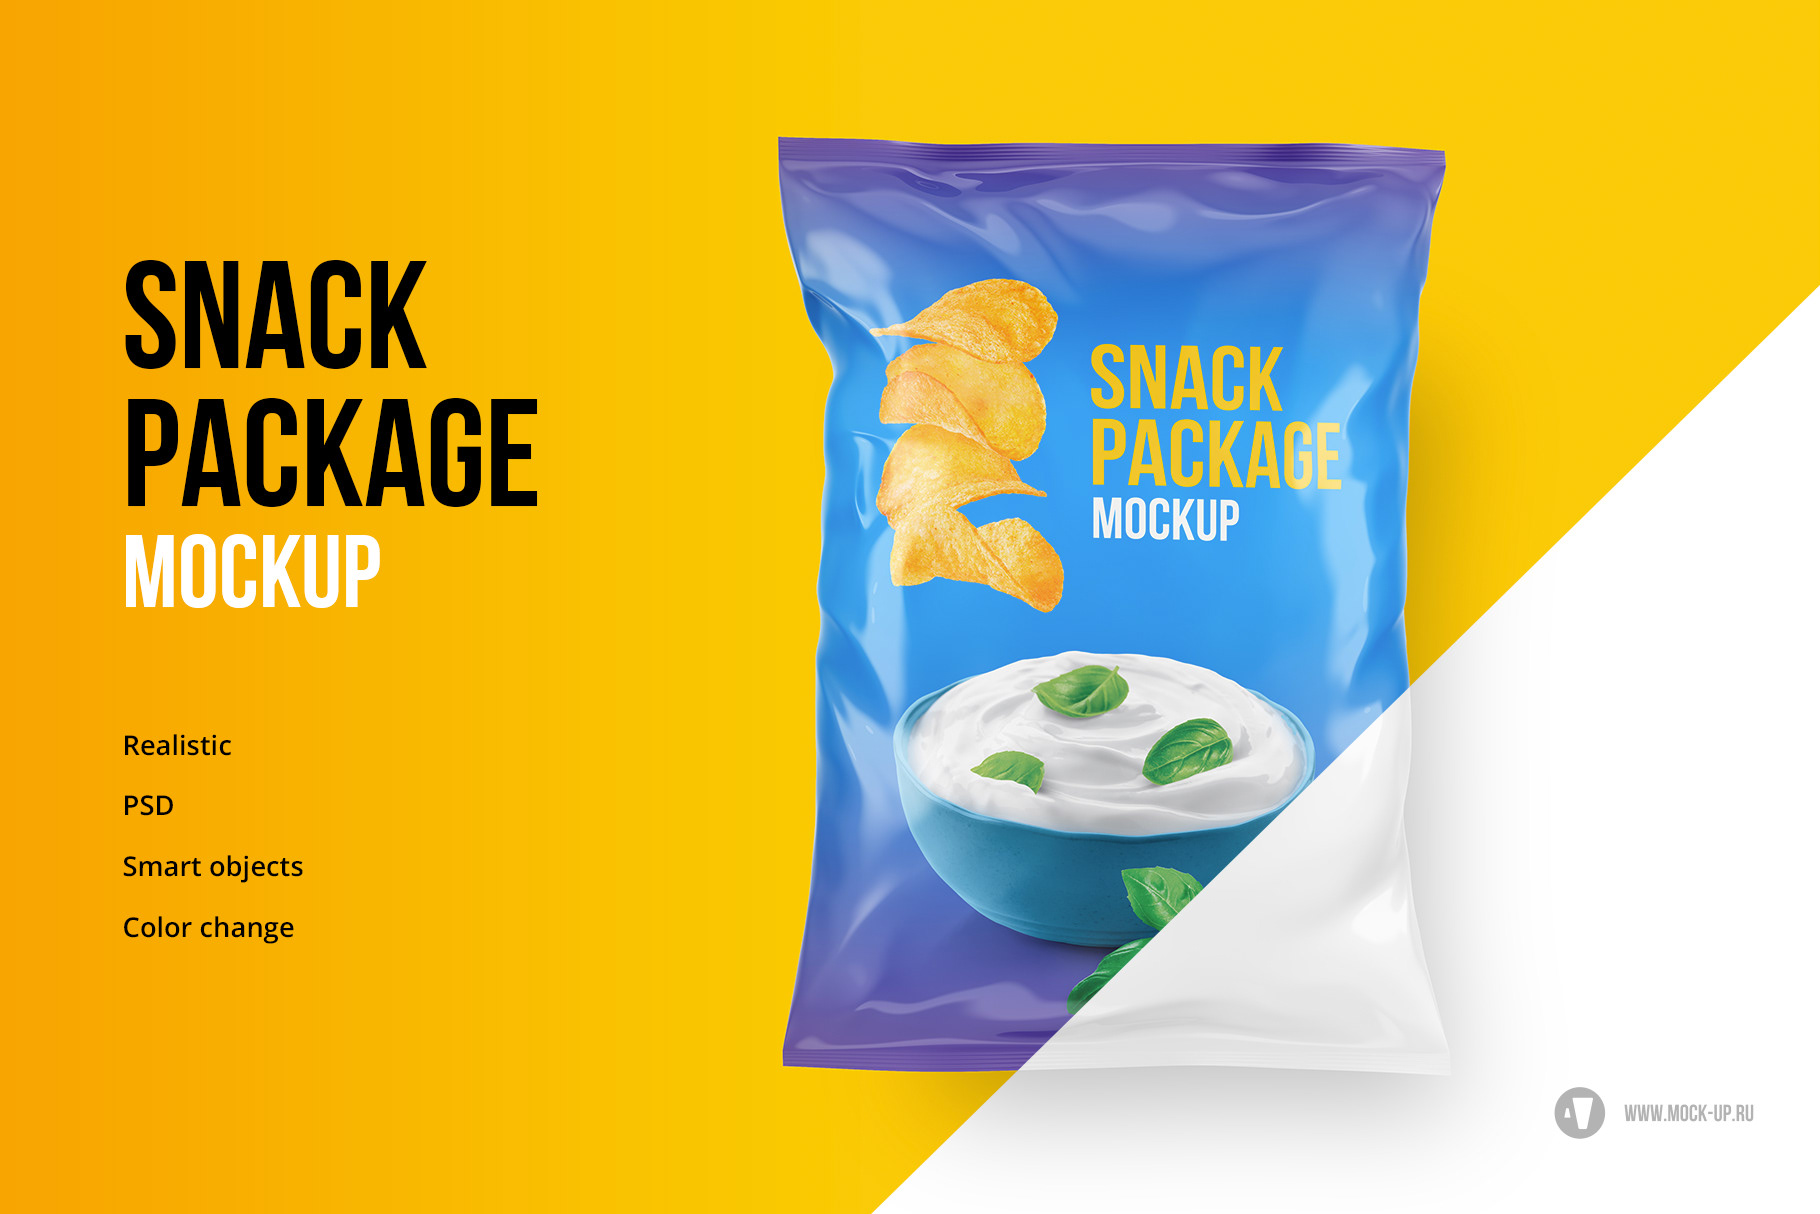 Download Exclusive Product Mockups - Snack Package Mockup